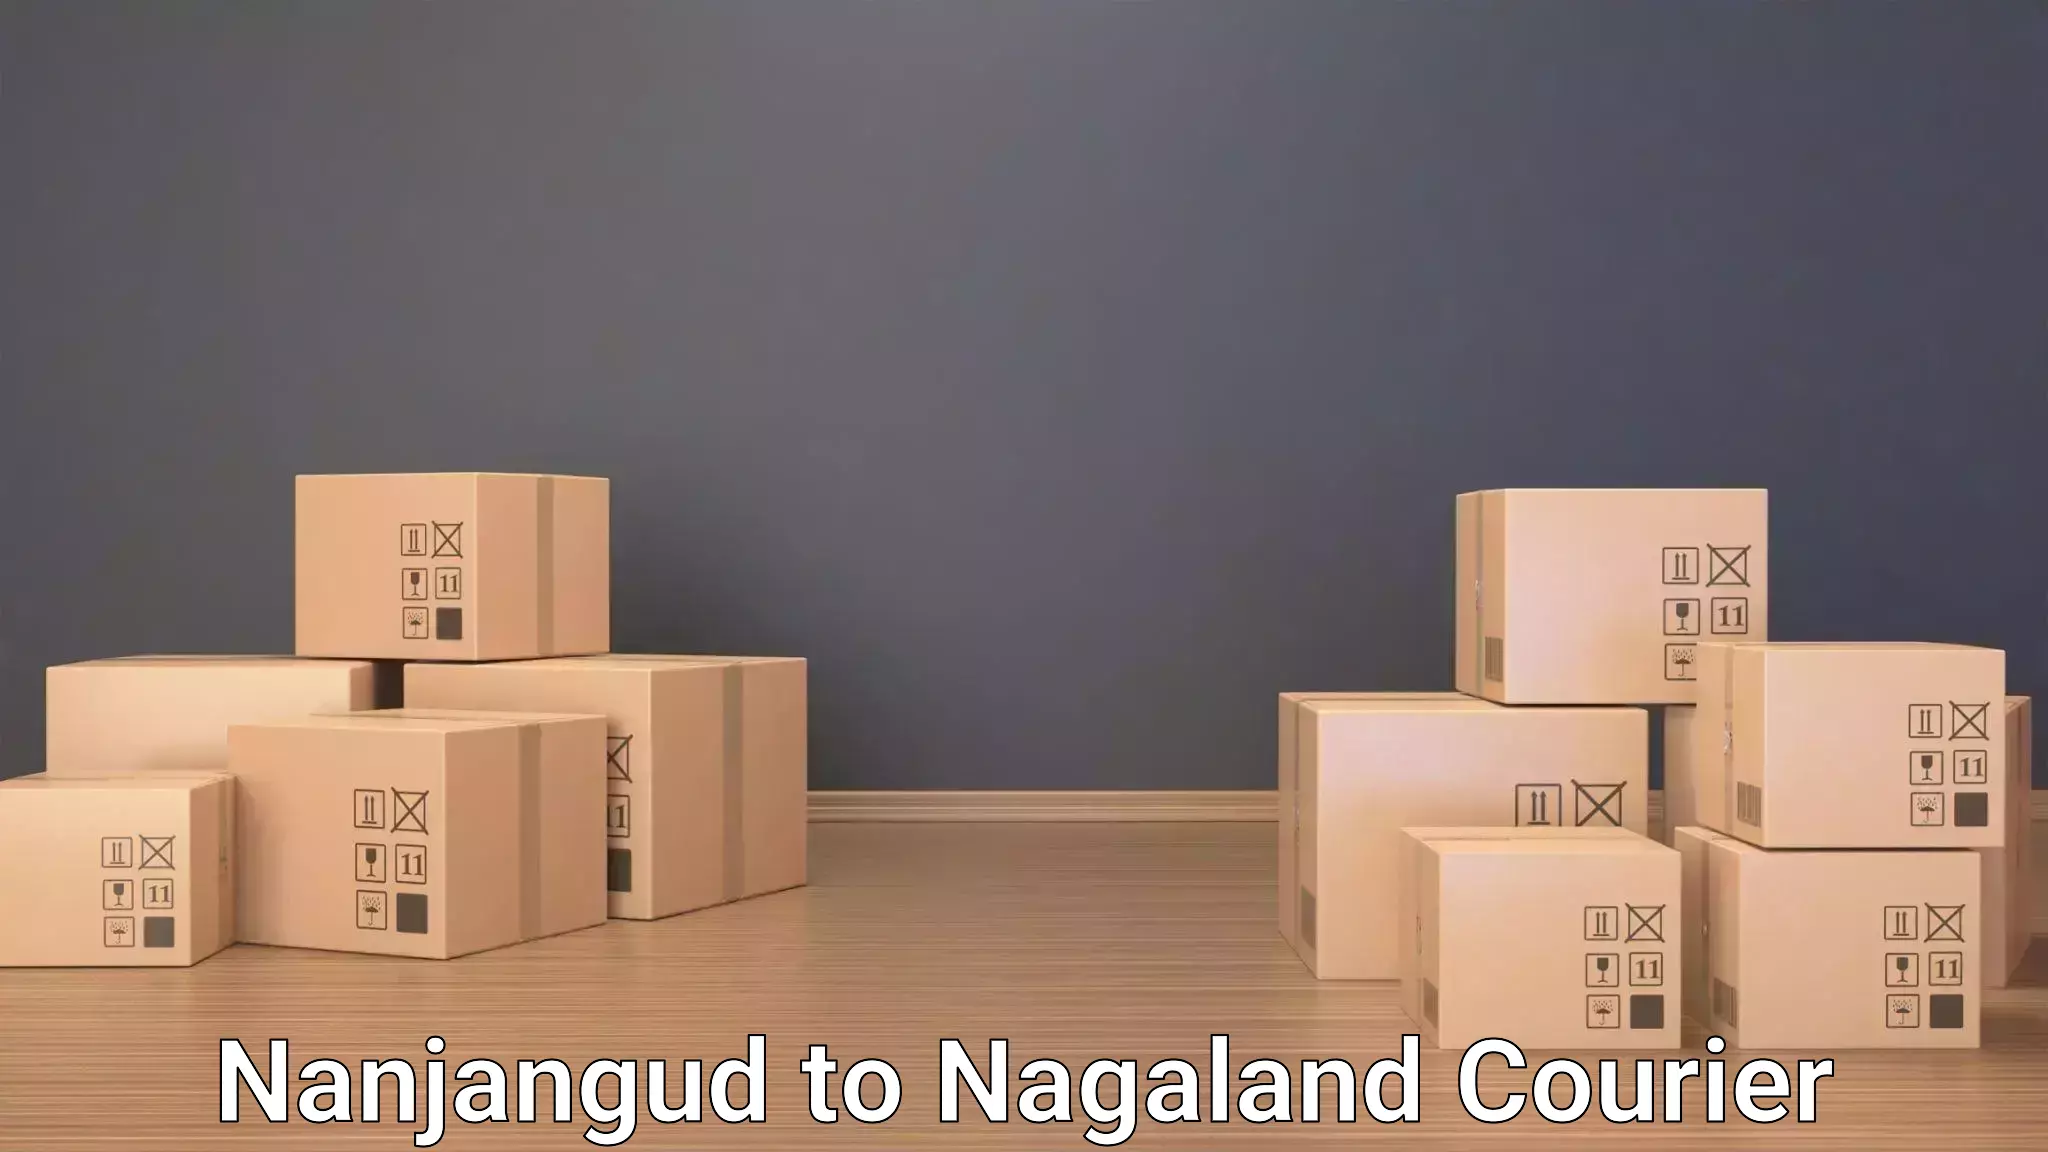 Luggage delivery app Nanjangud to Mon